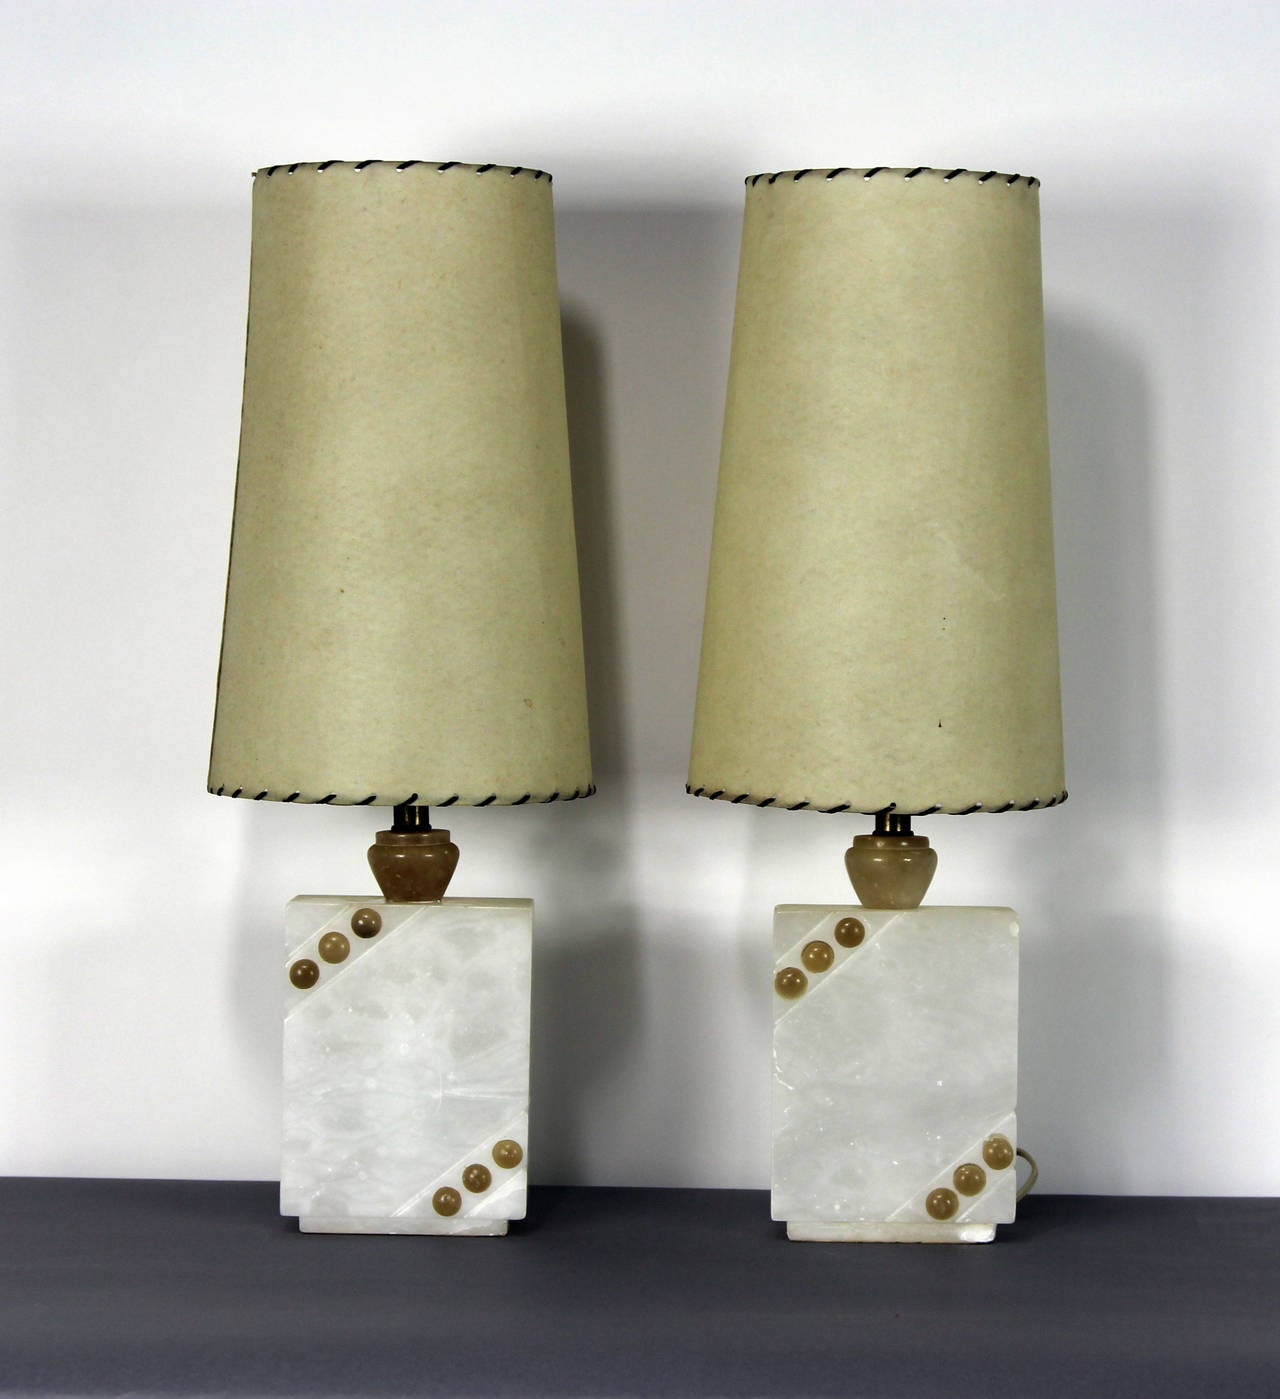 A superb pair of 1950s Italian modernist table lamps crafted from natural alabaster with tan alabaster accents and tan alabaster stems. These rare sculptural lamps have retained their original laced parchment shades.